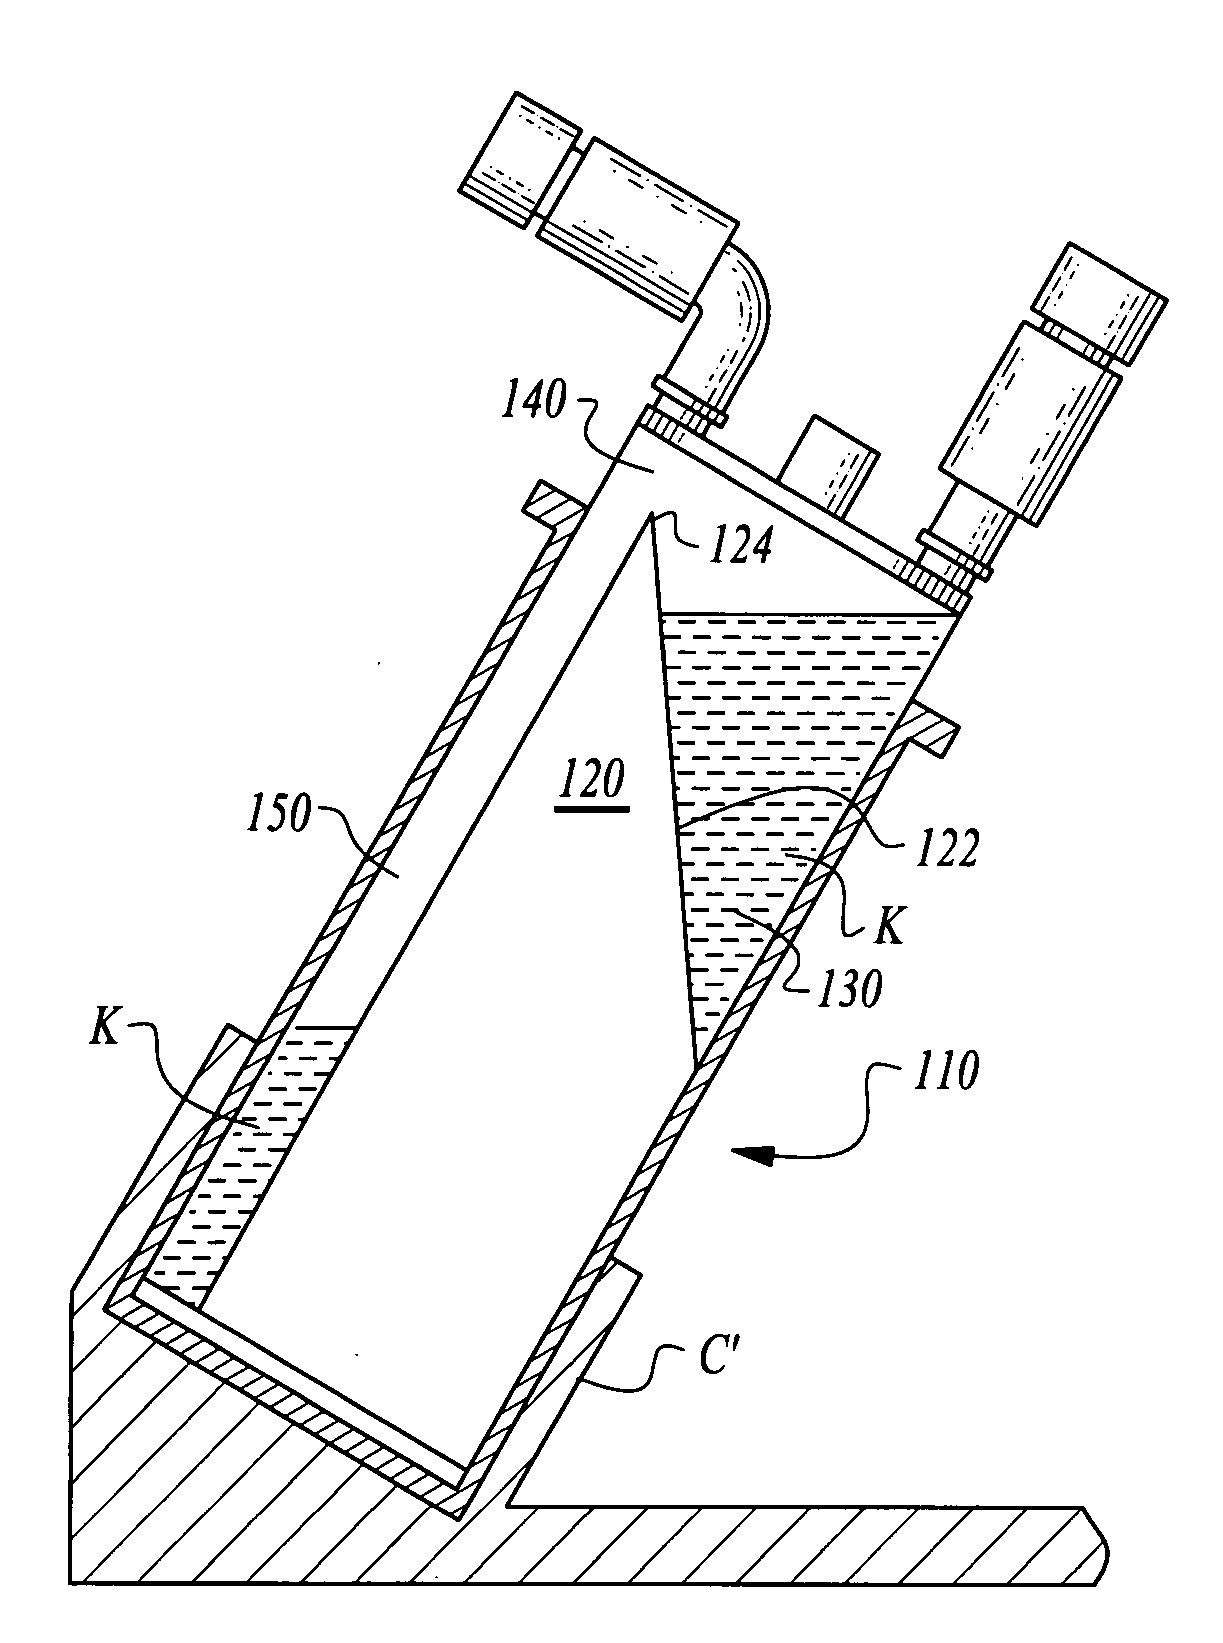 Centrifuge and separation vessel therefore